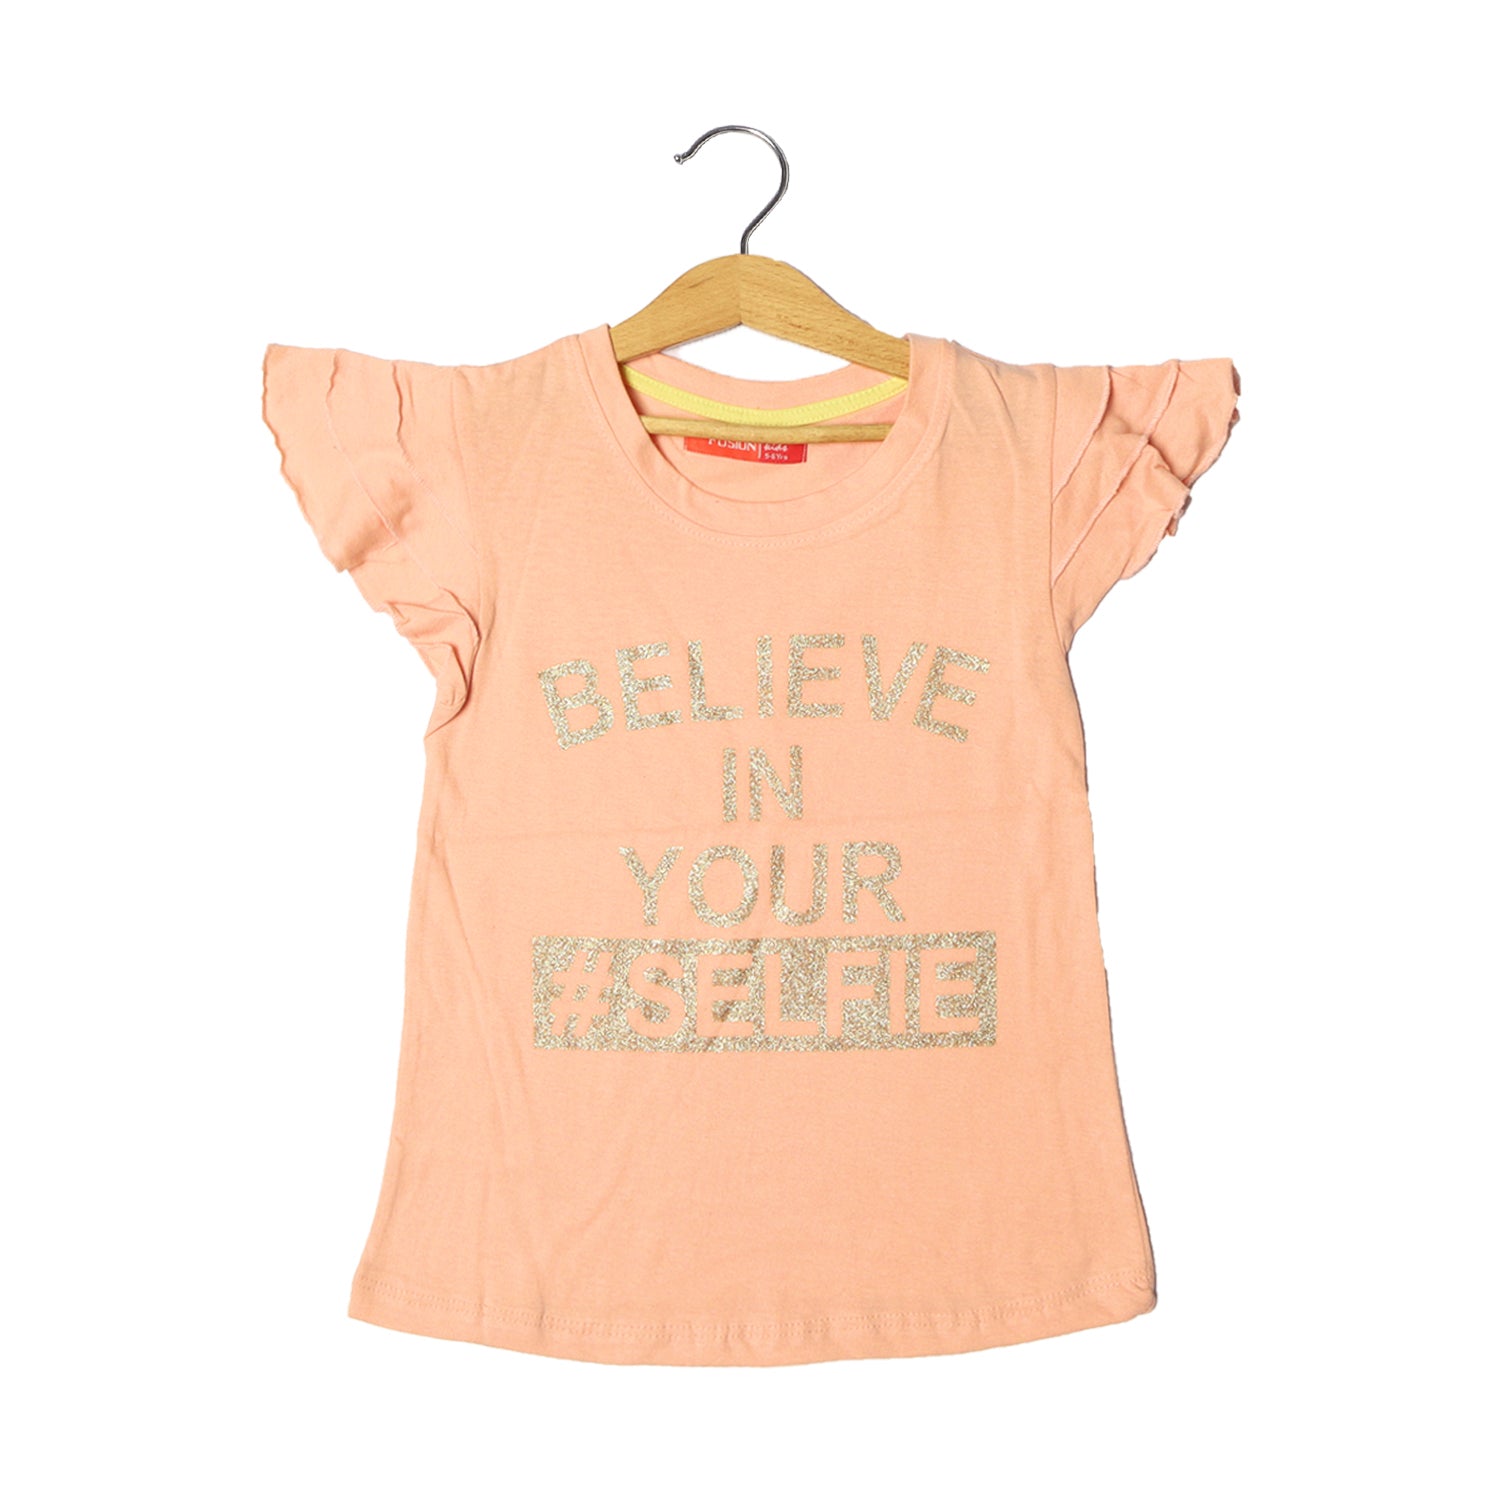 PEACH BELIEVE IN YOUR SELFIE PRINTED T-SHIRT FOR GIRLS